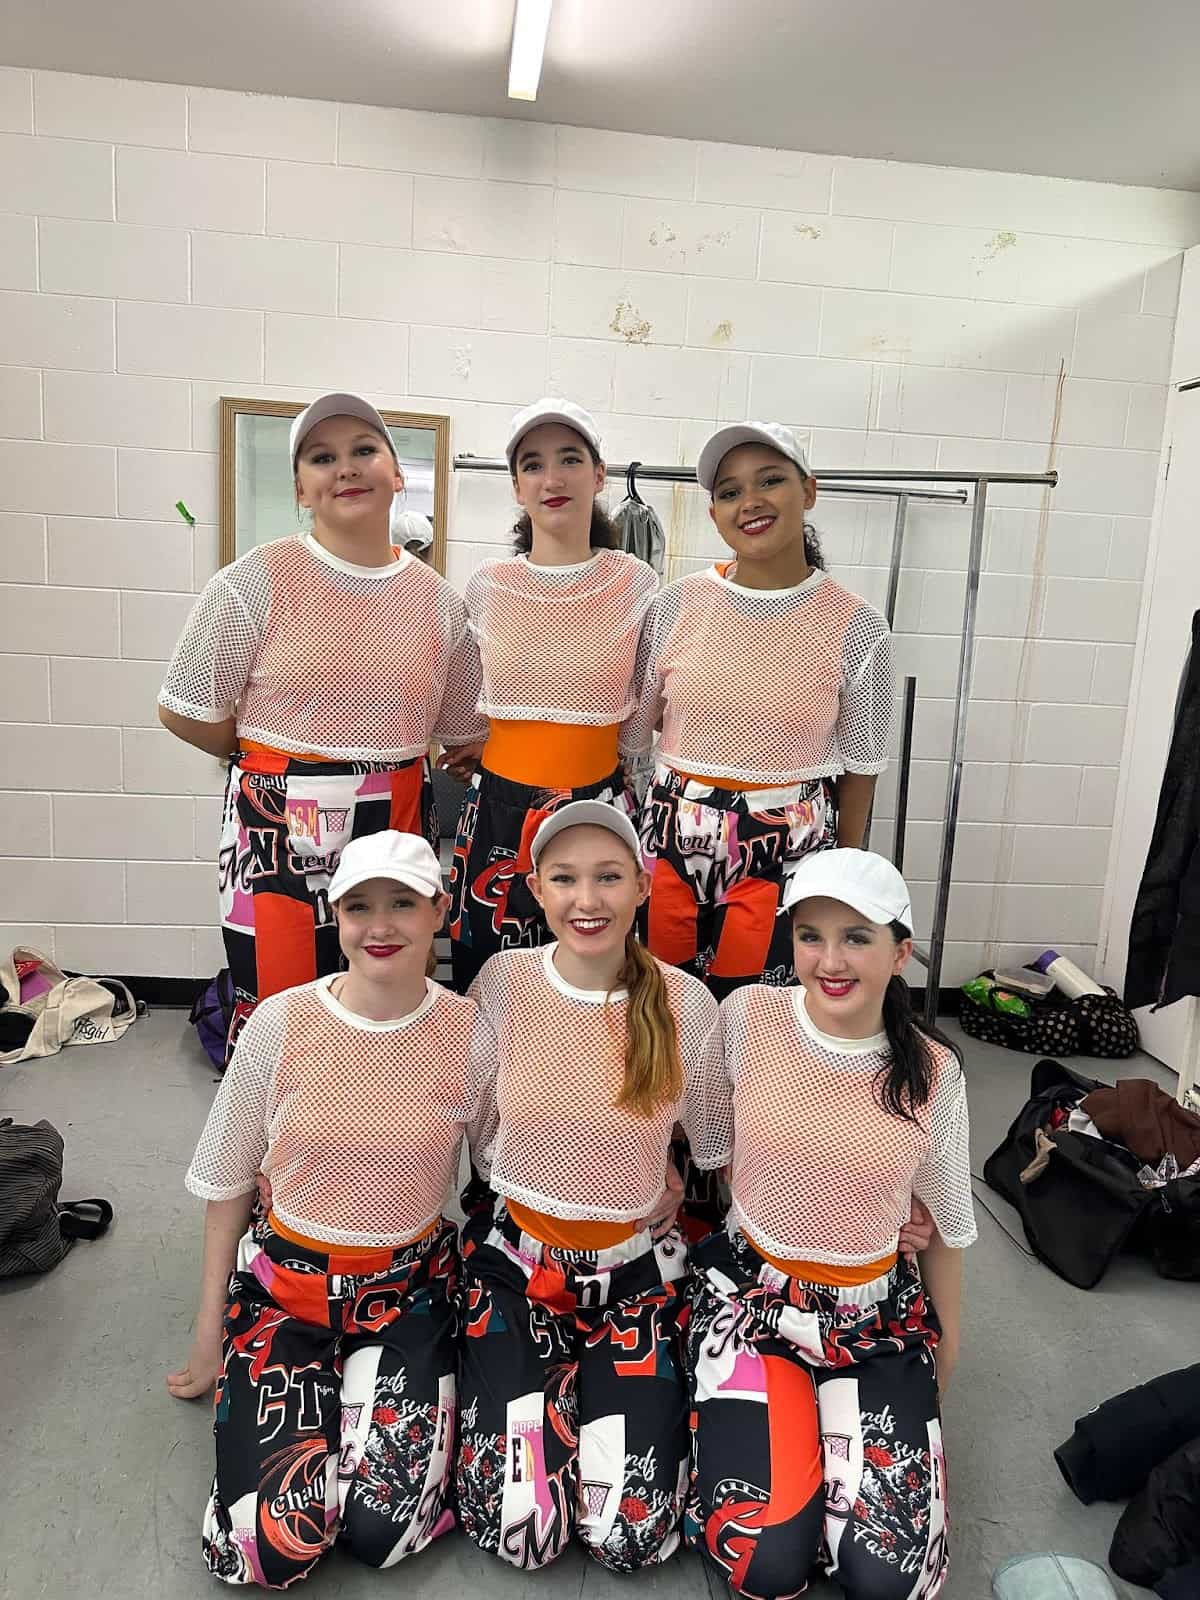 The Opens Hip-Hop troupe received 1st place at the Quota Beenleigh Eisteddfod.